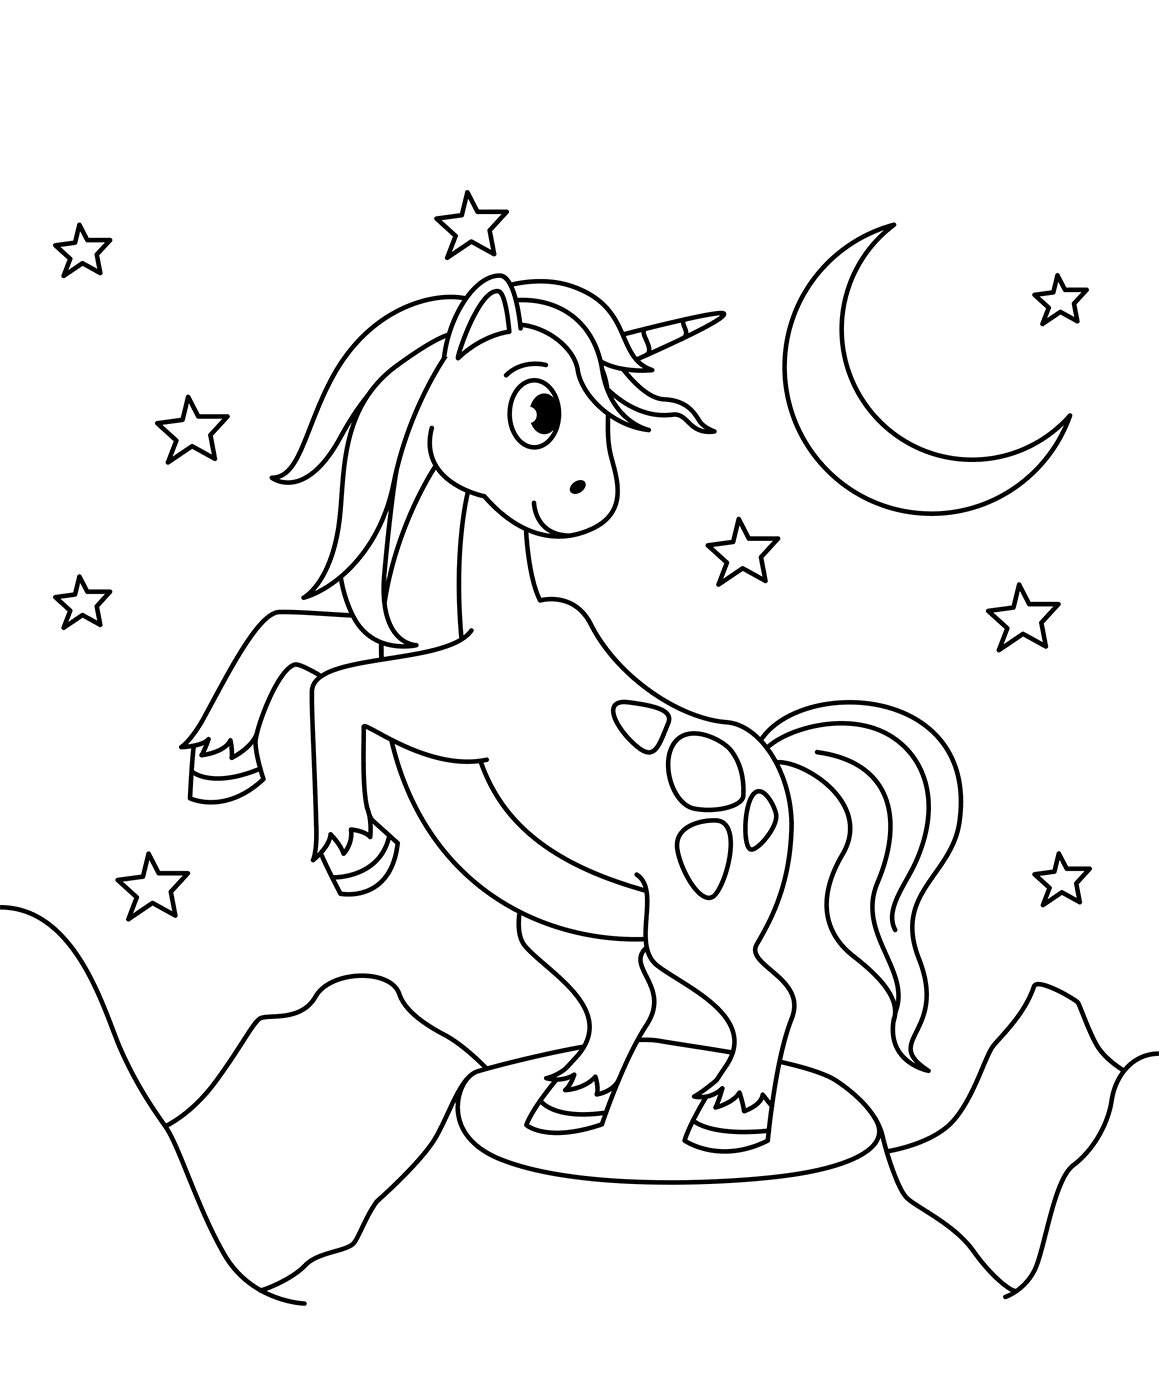 Midnight Unicorn Coloring Page